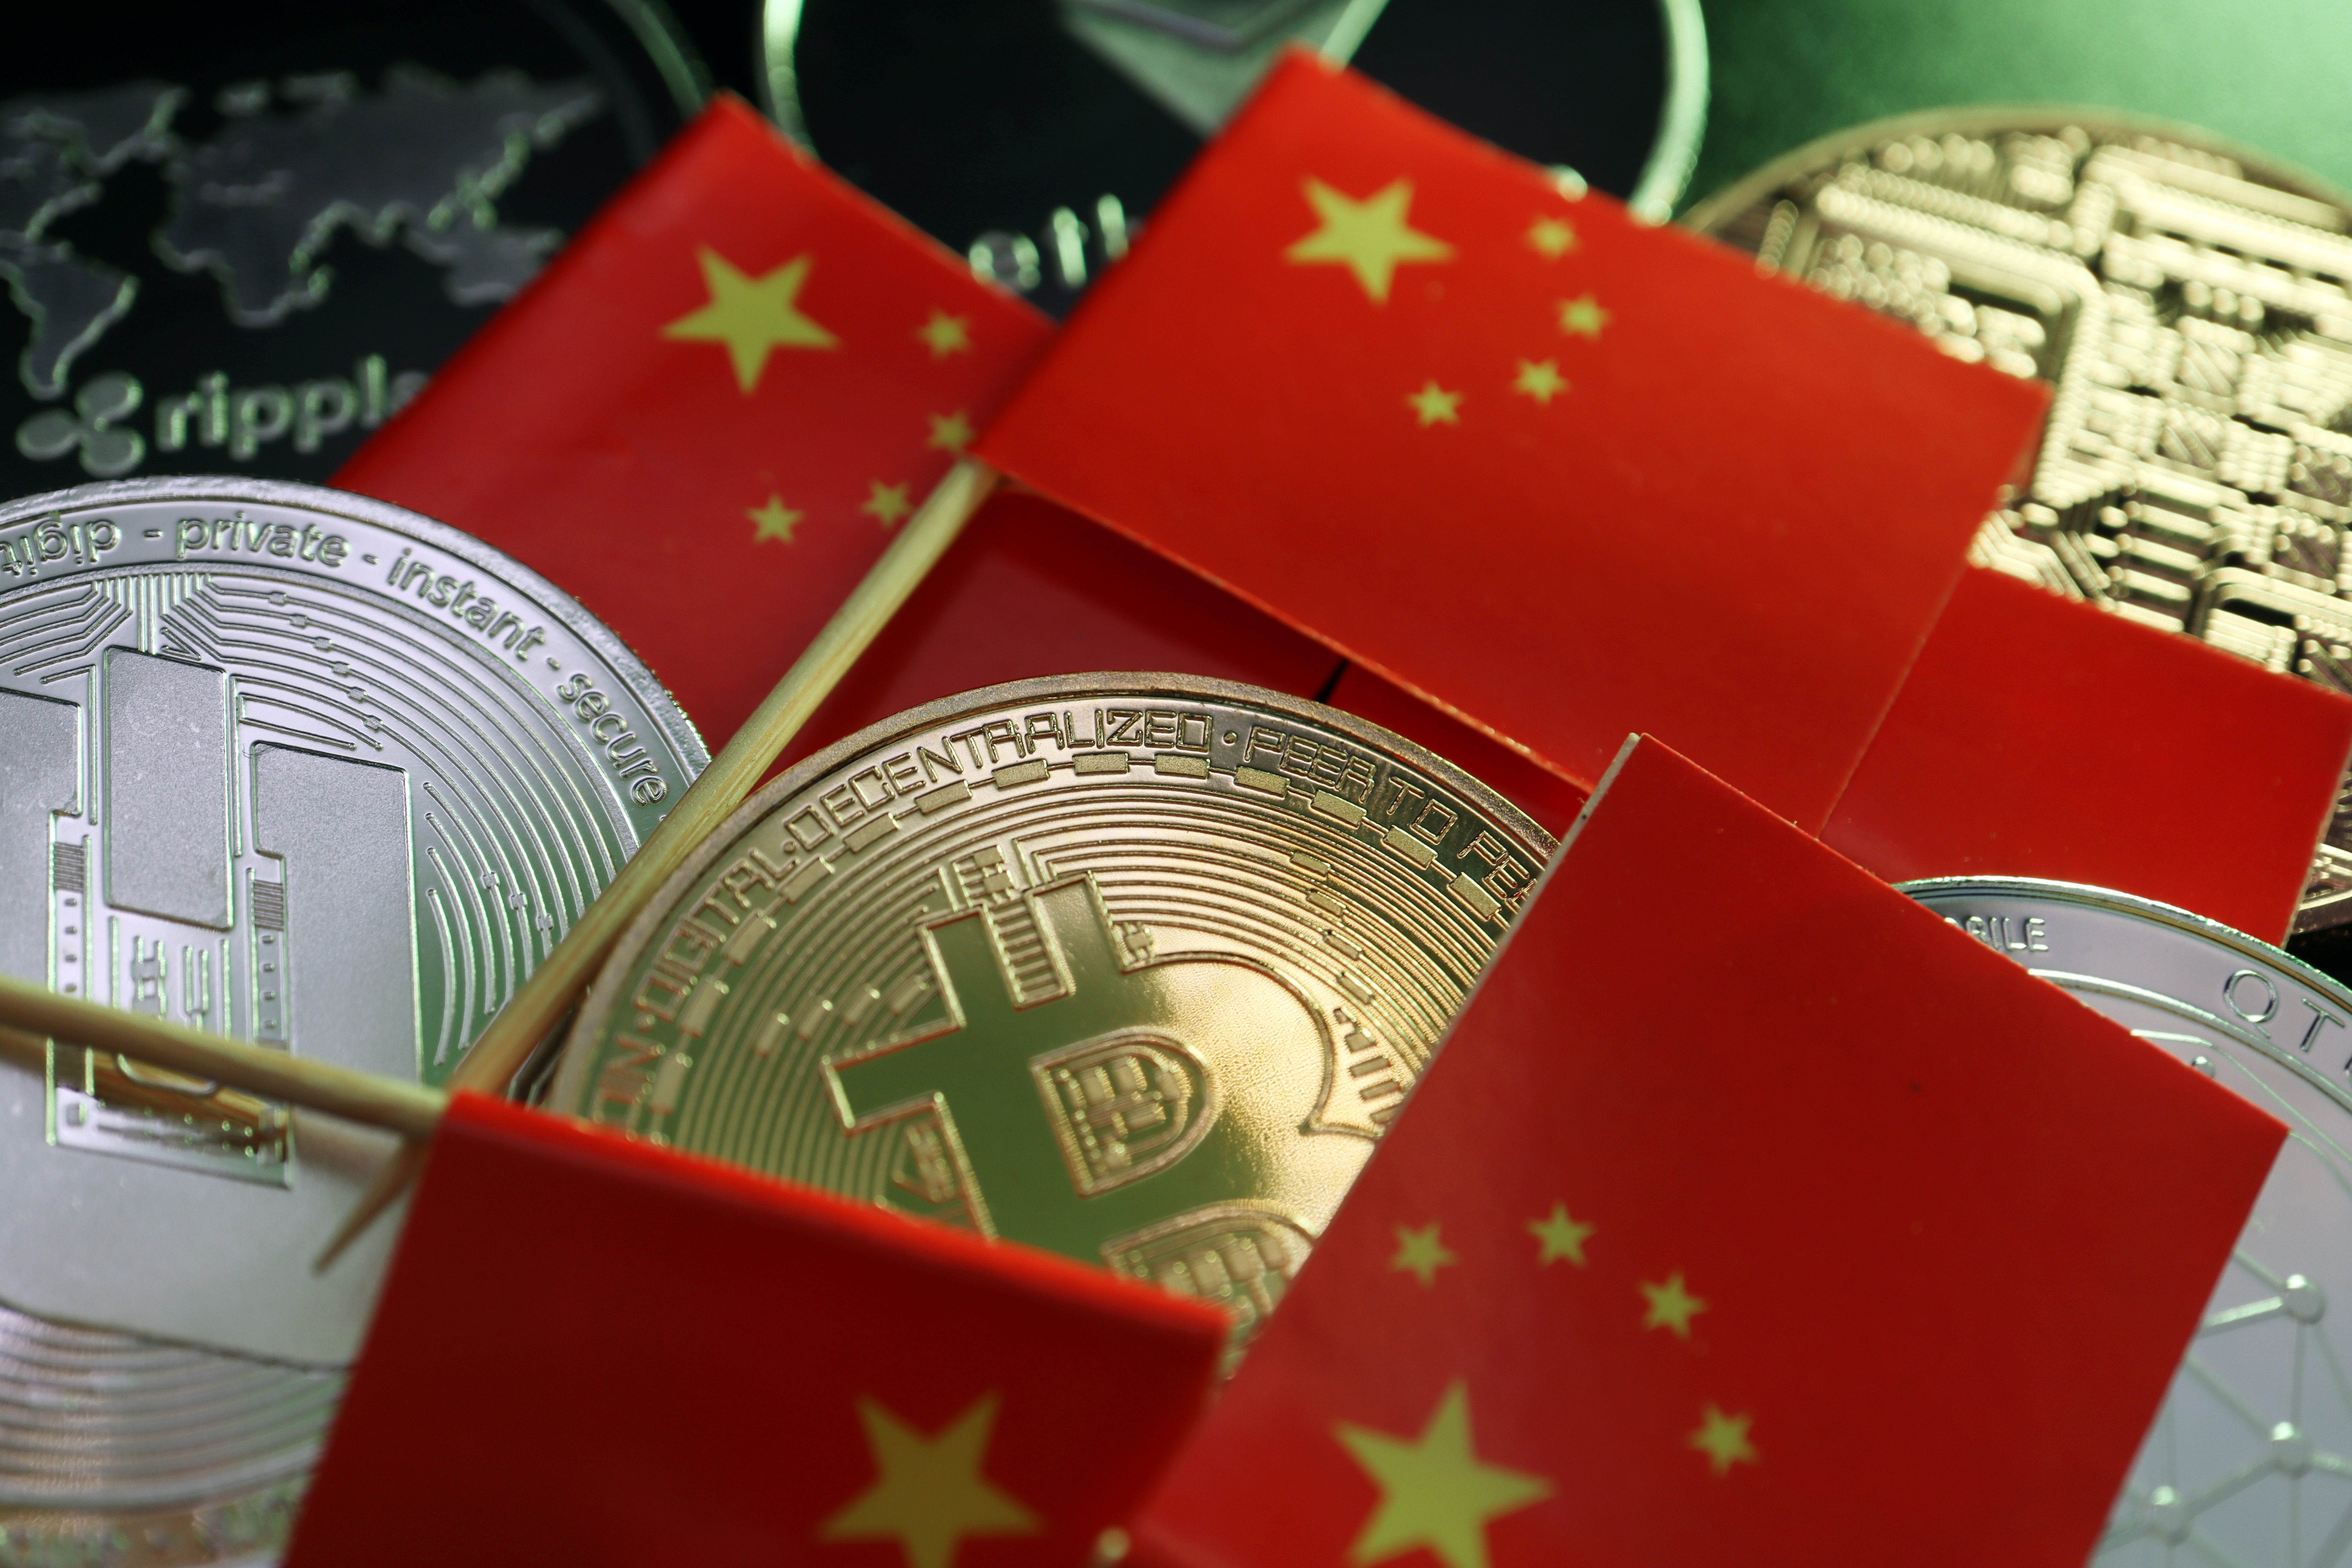 Chinese flags are seen among representations of Bitcoin, Dash, Ripple, Ethereum and other cryptocurrencies in this illustration picture taken June 2, 2021.